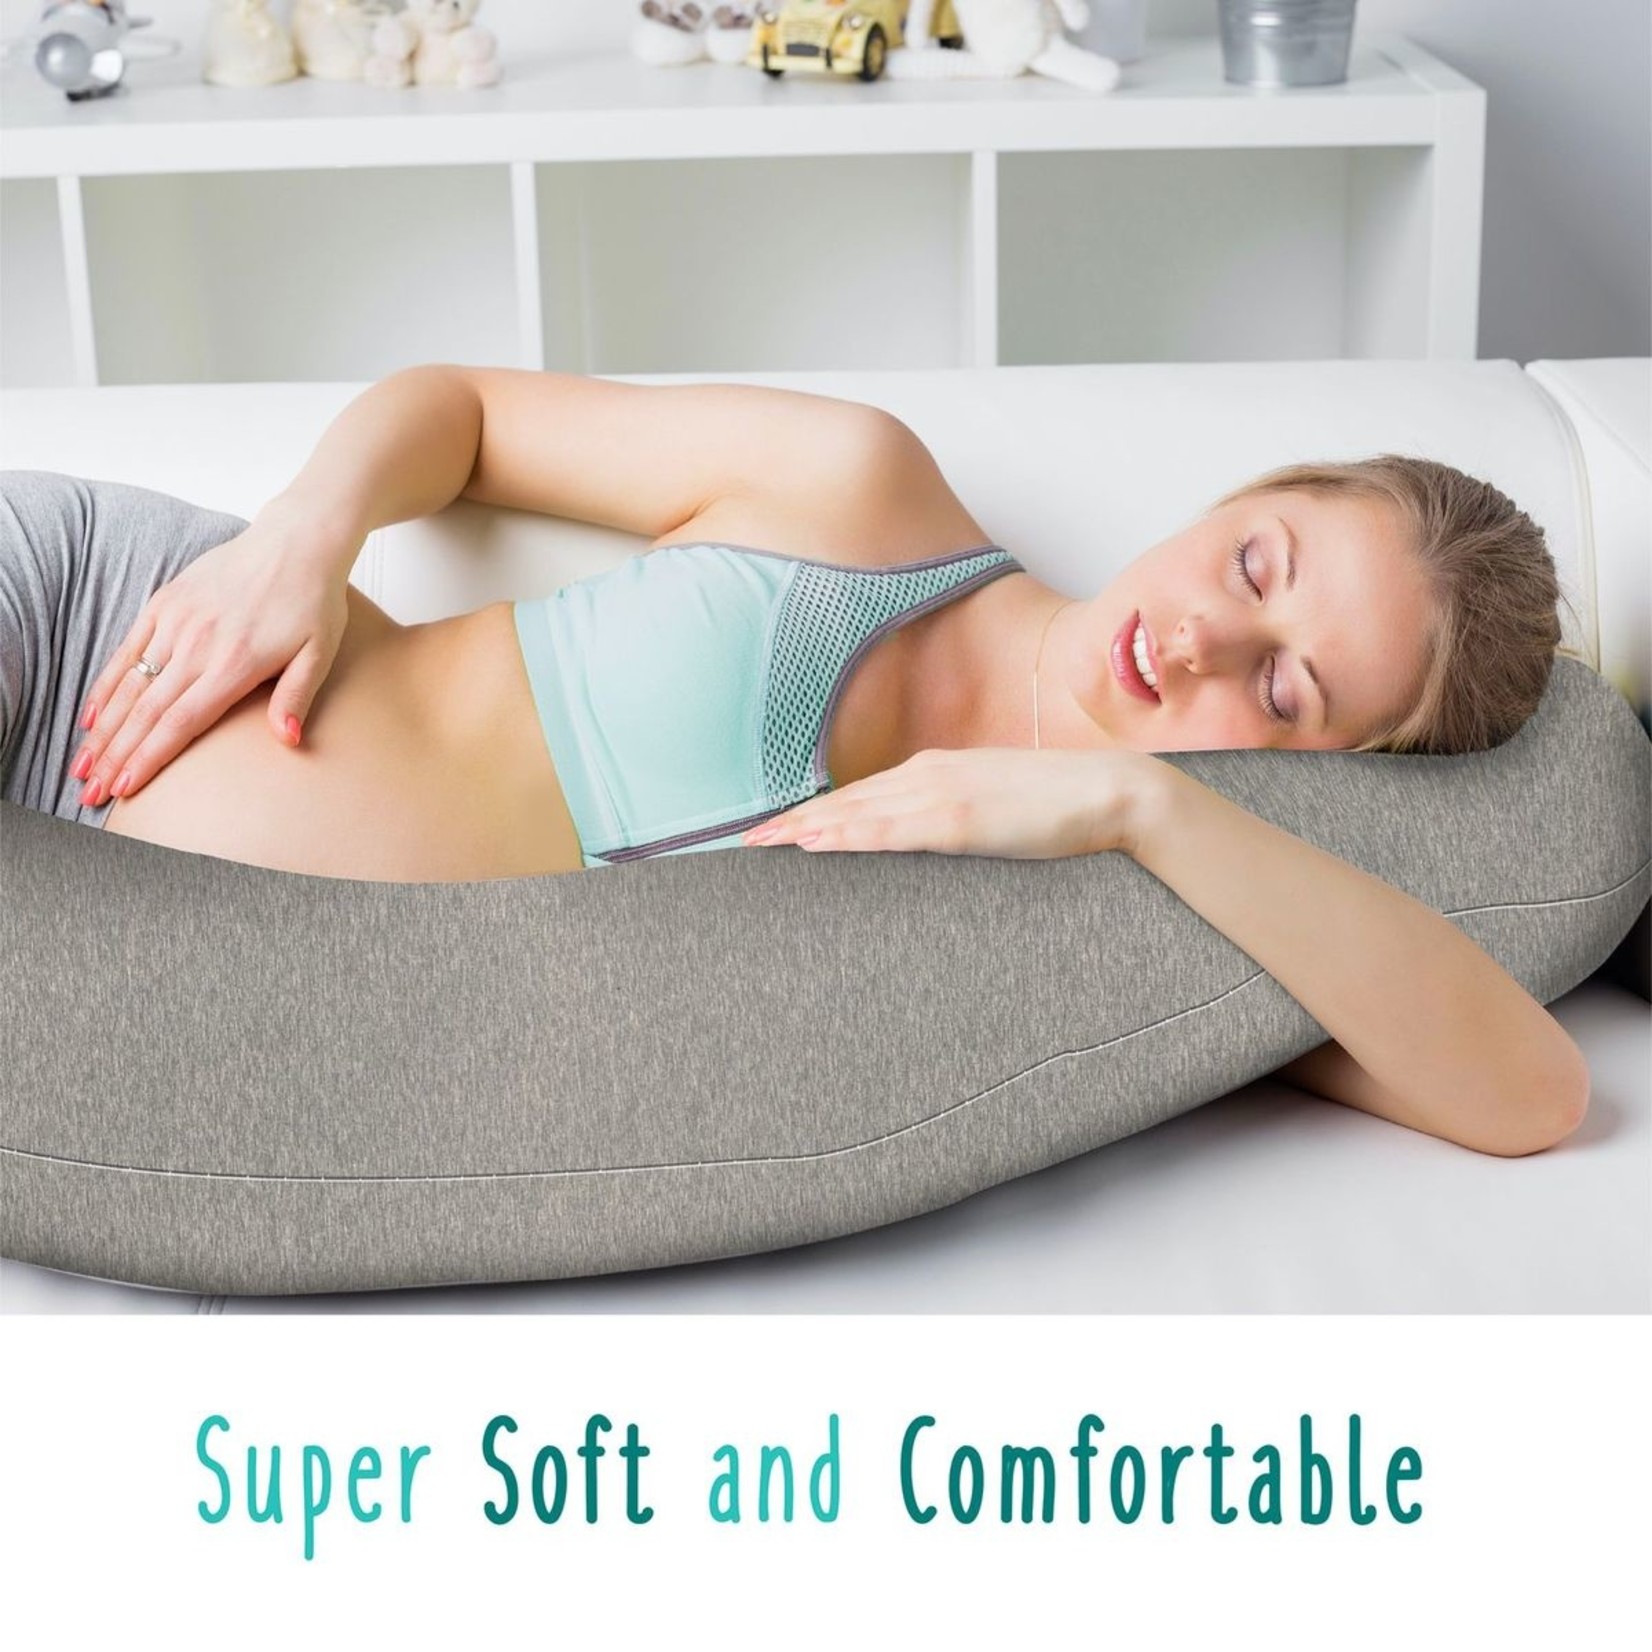 Baby Works Cozy Cuddler Maternity Pillow